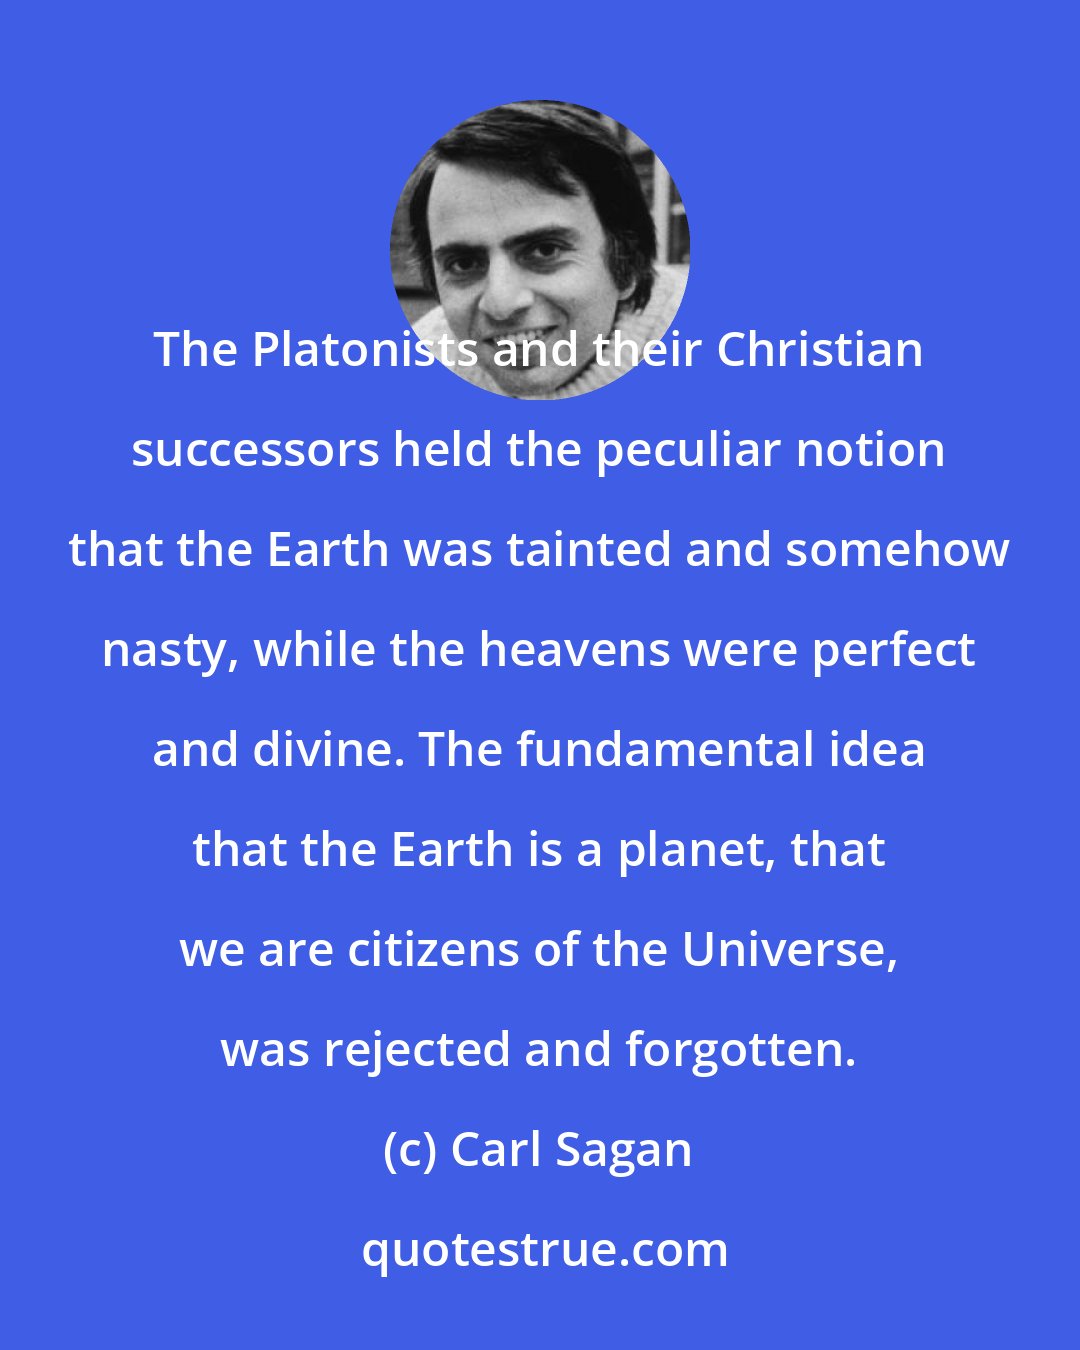 Carl Sagan: The Platonists and their Christian successors held the peculiar notion that the Earth was tainted and somehow nasty, while the heavens were perfect and divine. The fundamental idea that the Earth is a planet, that we are citizens of the Universe, was rejected and forgotten.